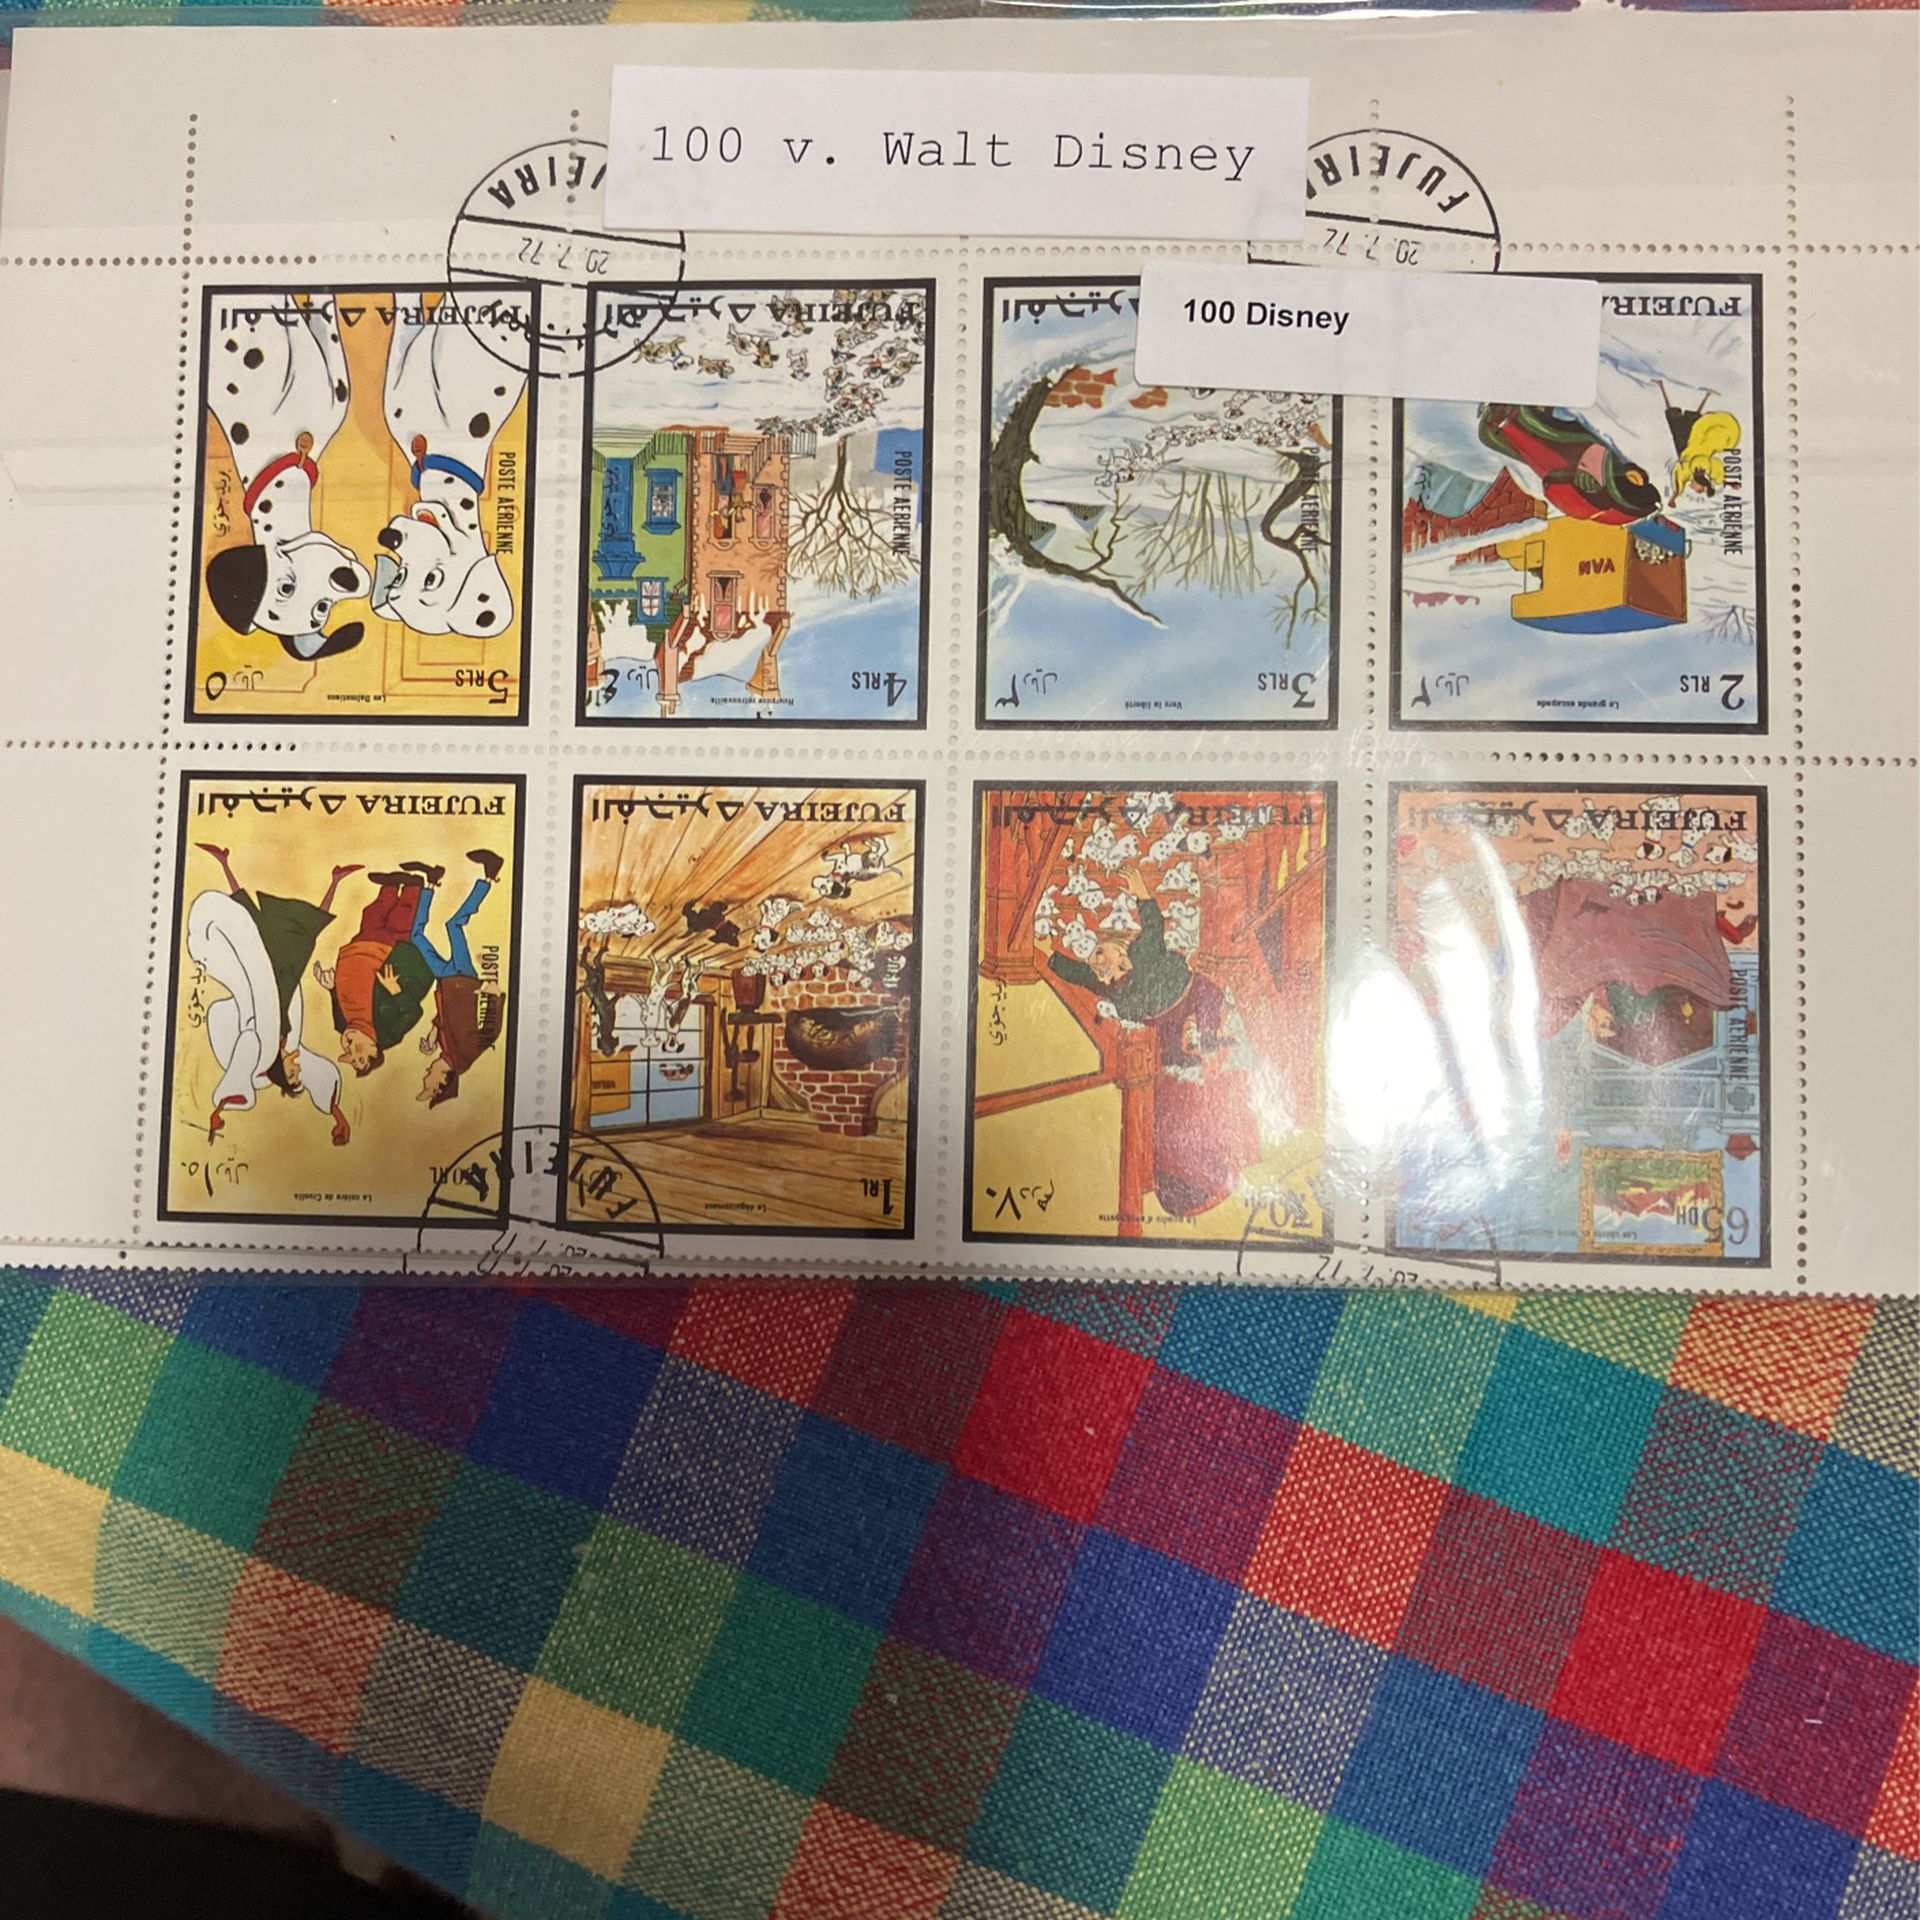 ANYONE COLLECT DISNEY STAMPS